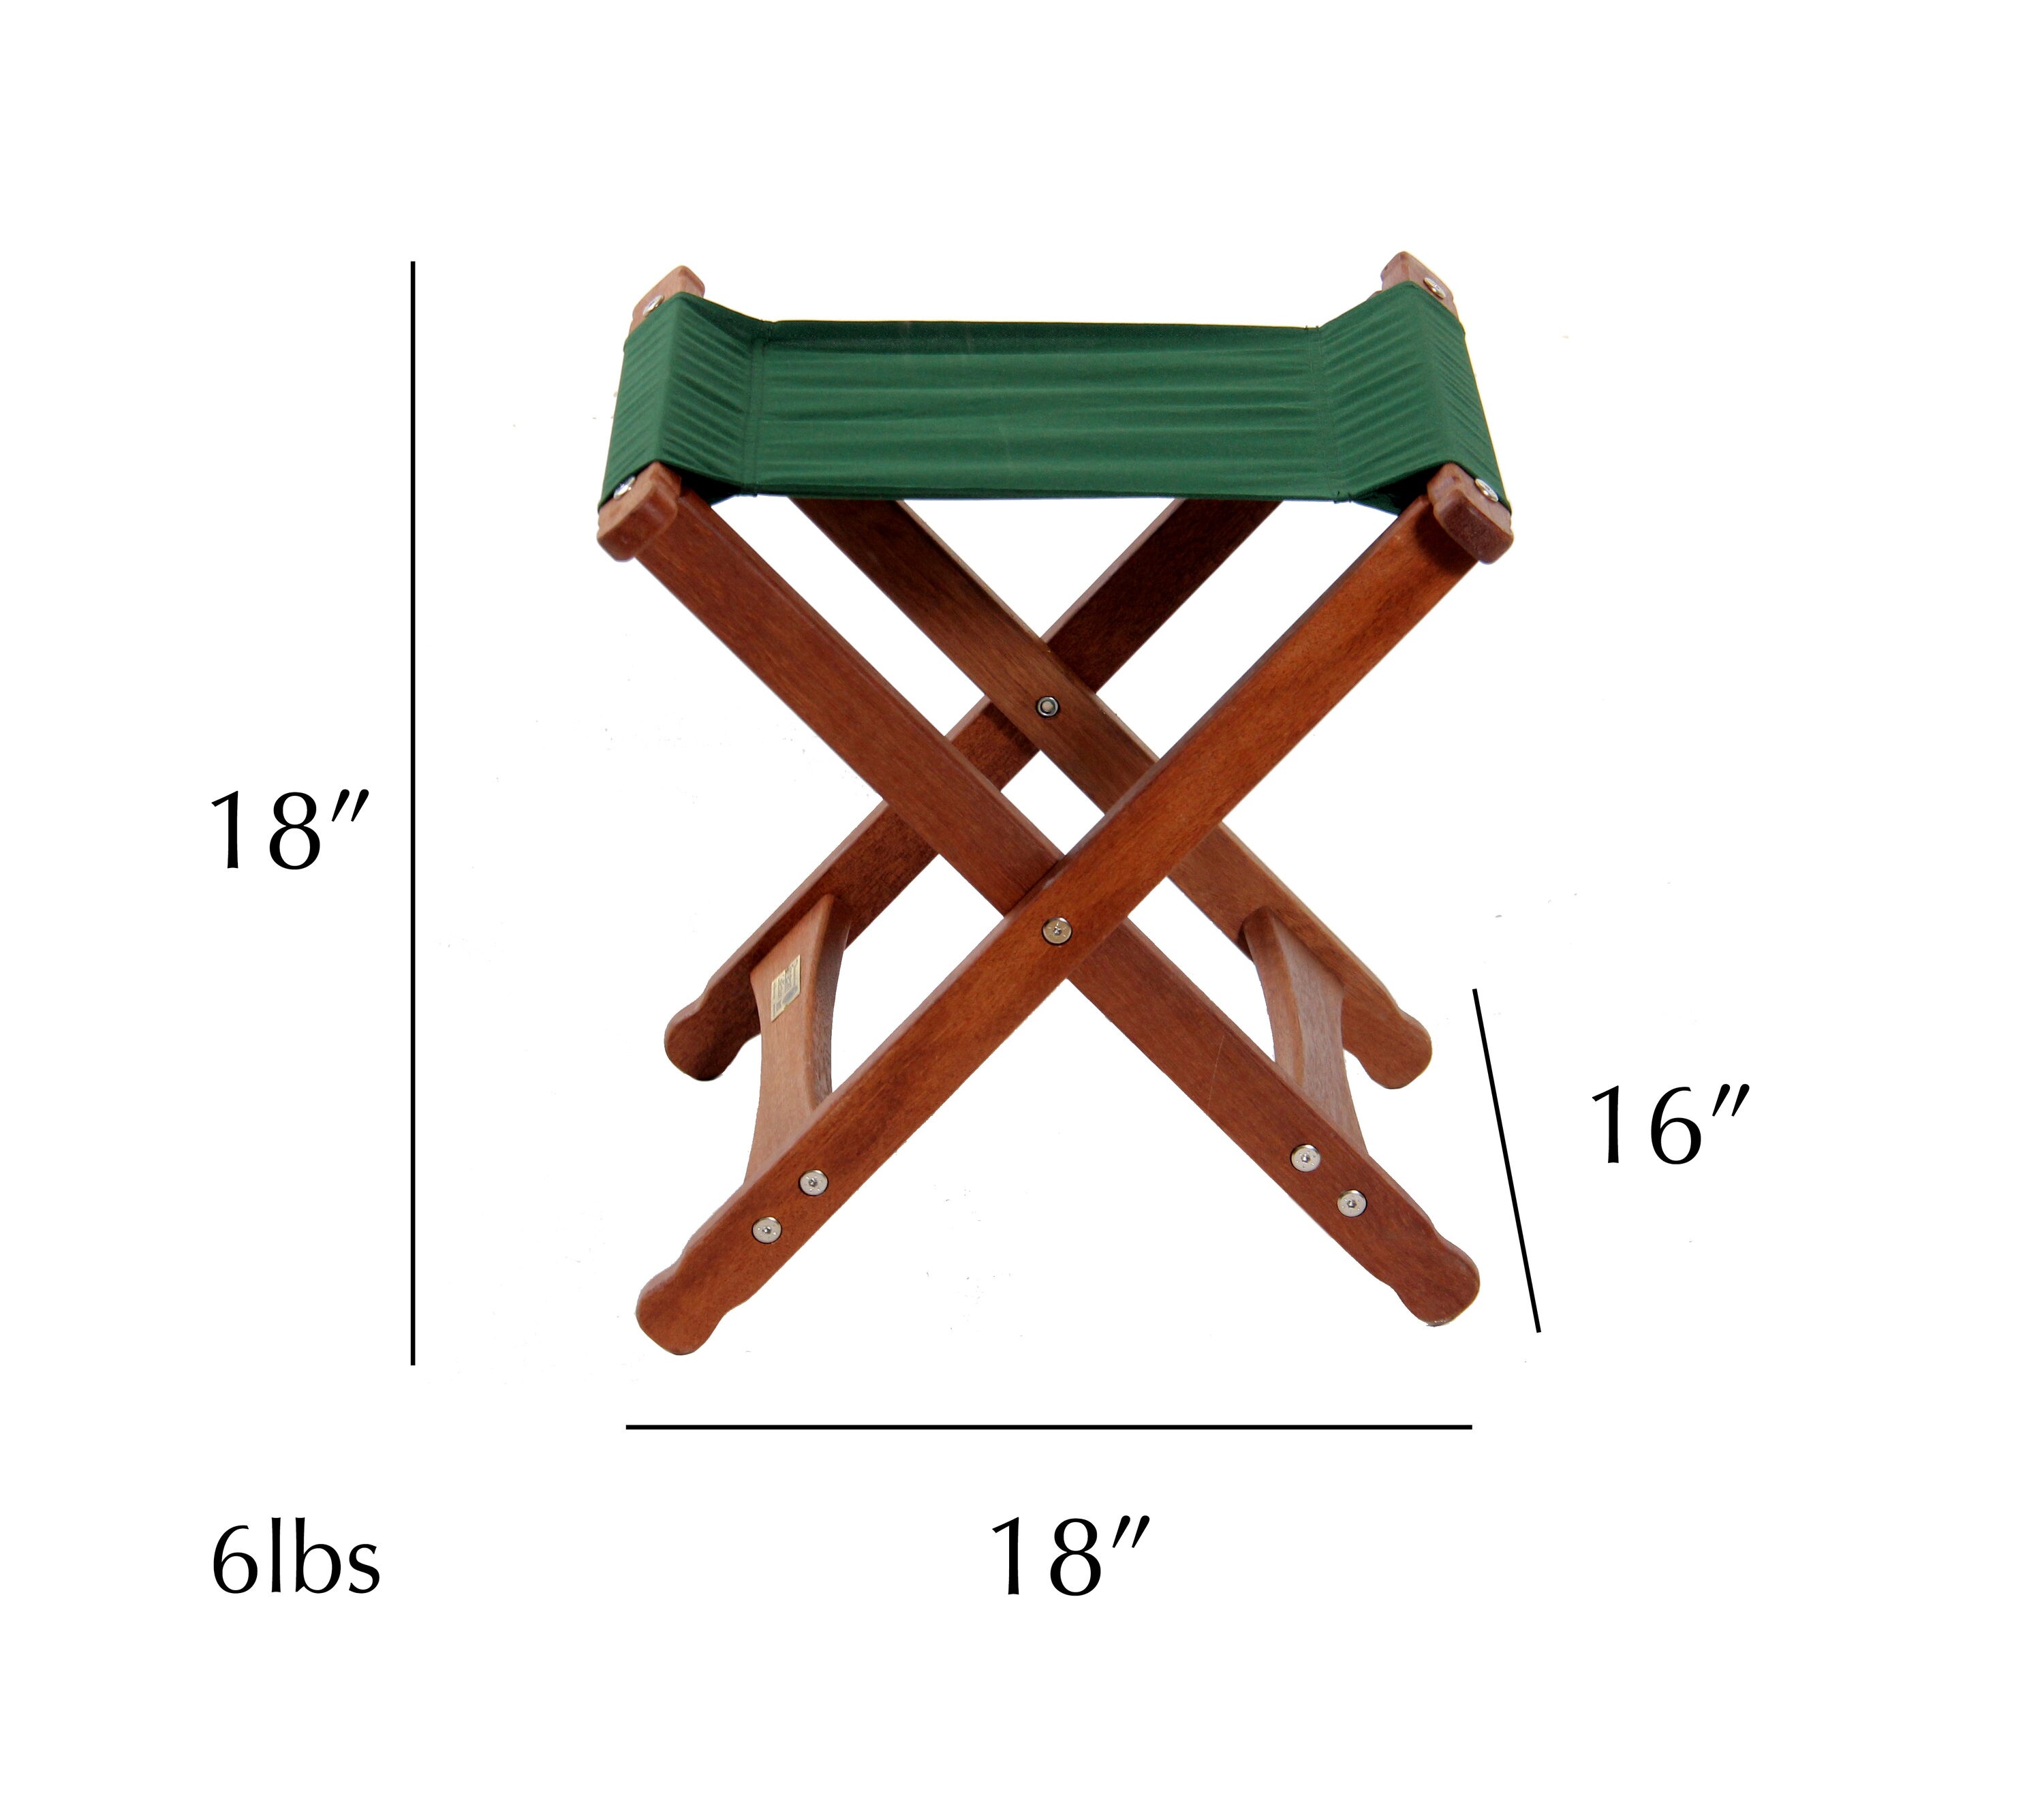 Outdoor Camping Portable Outdoor Camping Leisure Chair Wooden Folding Chair Paper Towels And Other Oxford Cloth Folding Chairs For Fishing The Back Sandwich Can Put Magazines Cups Hiking Bla 